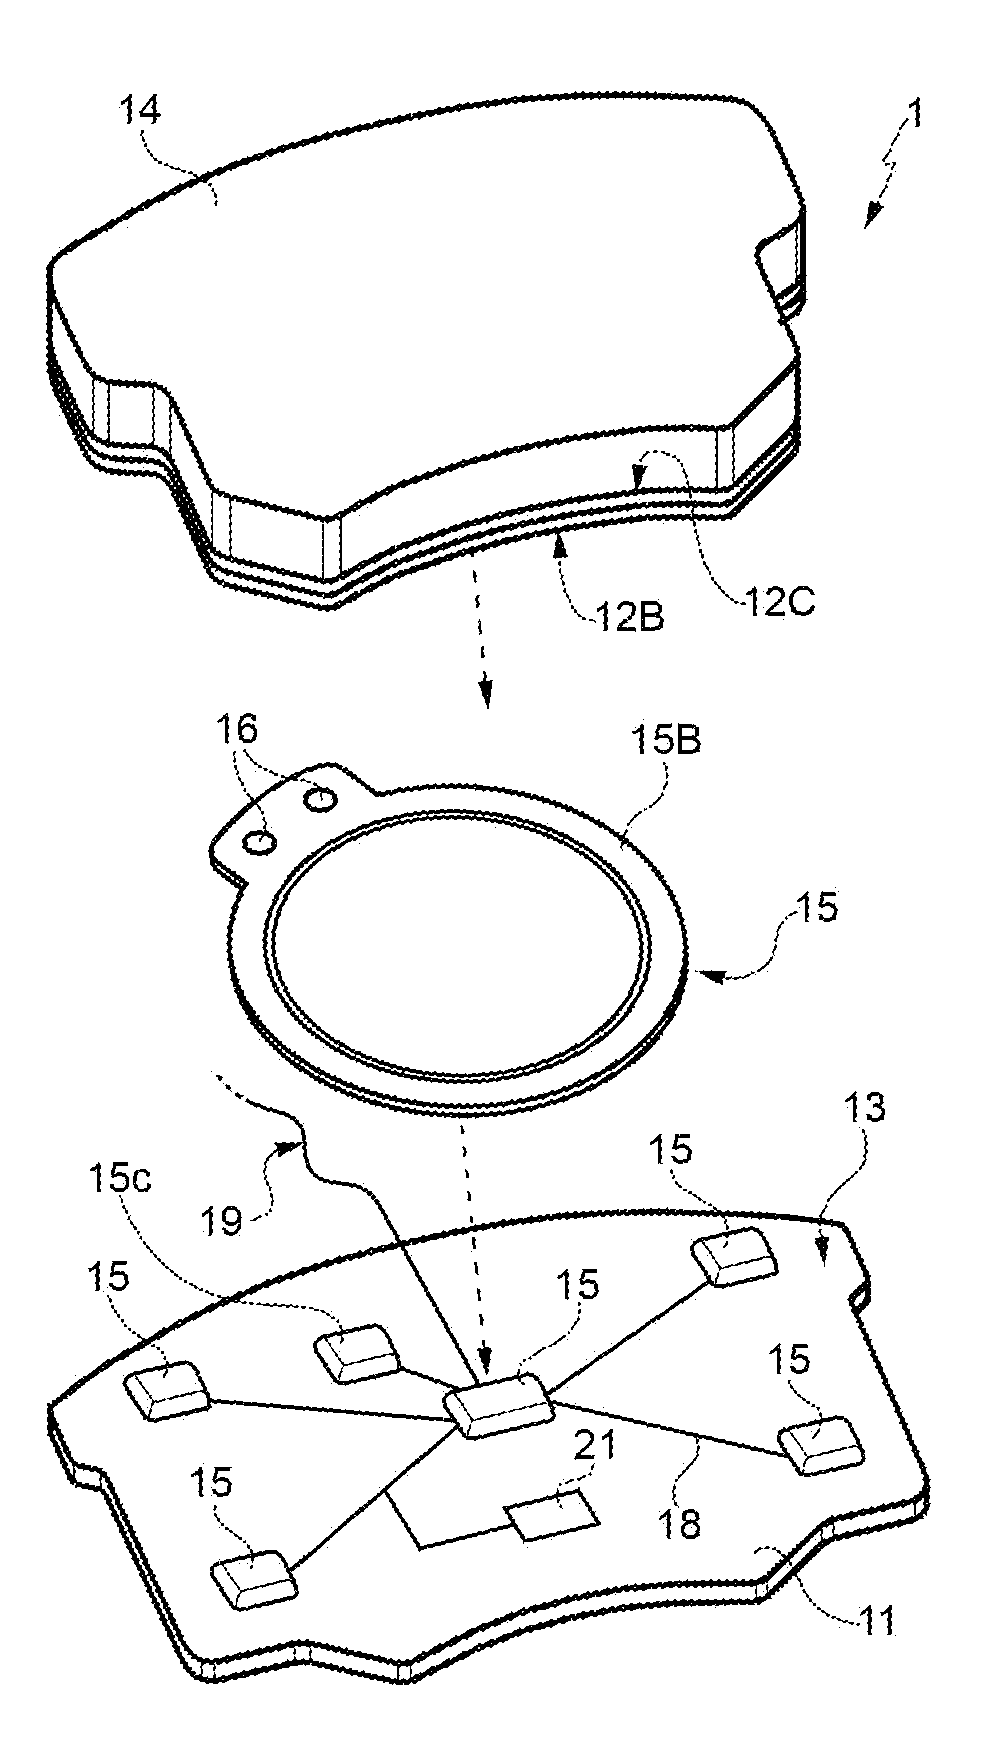 Method for manufacturing a braking element with integrated sensor, in particular a brake pad, brake pad with integrated sensor, vehicle braking system and associated method